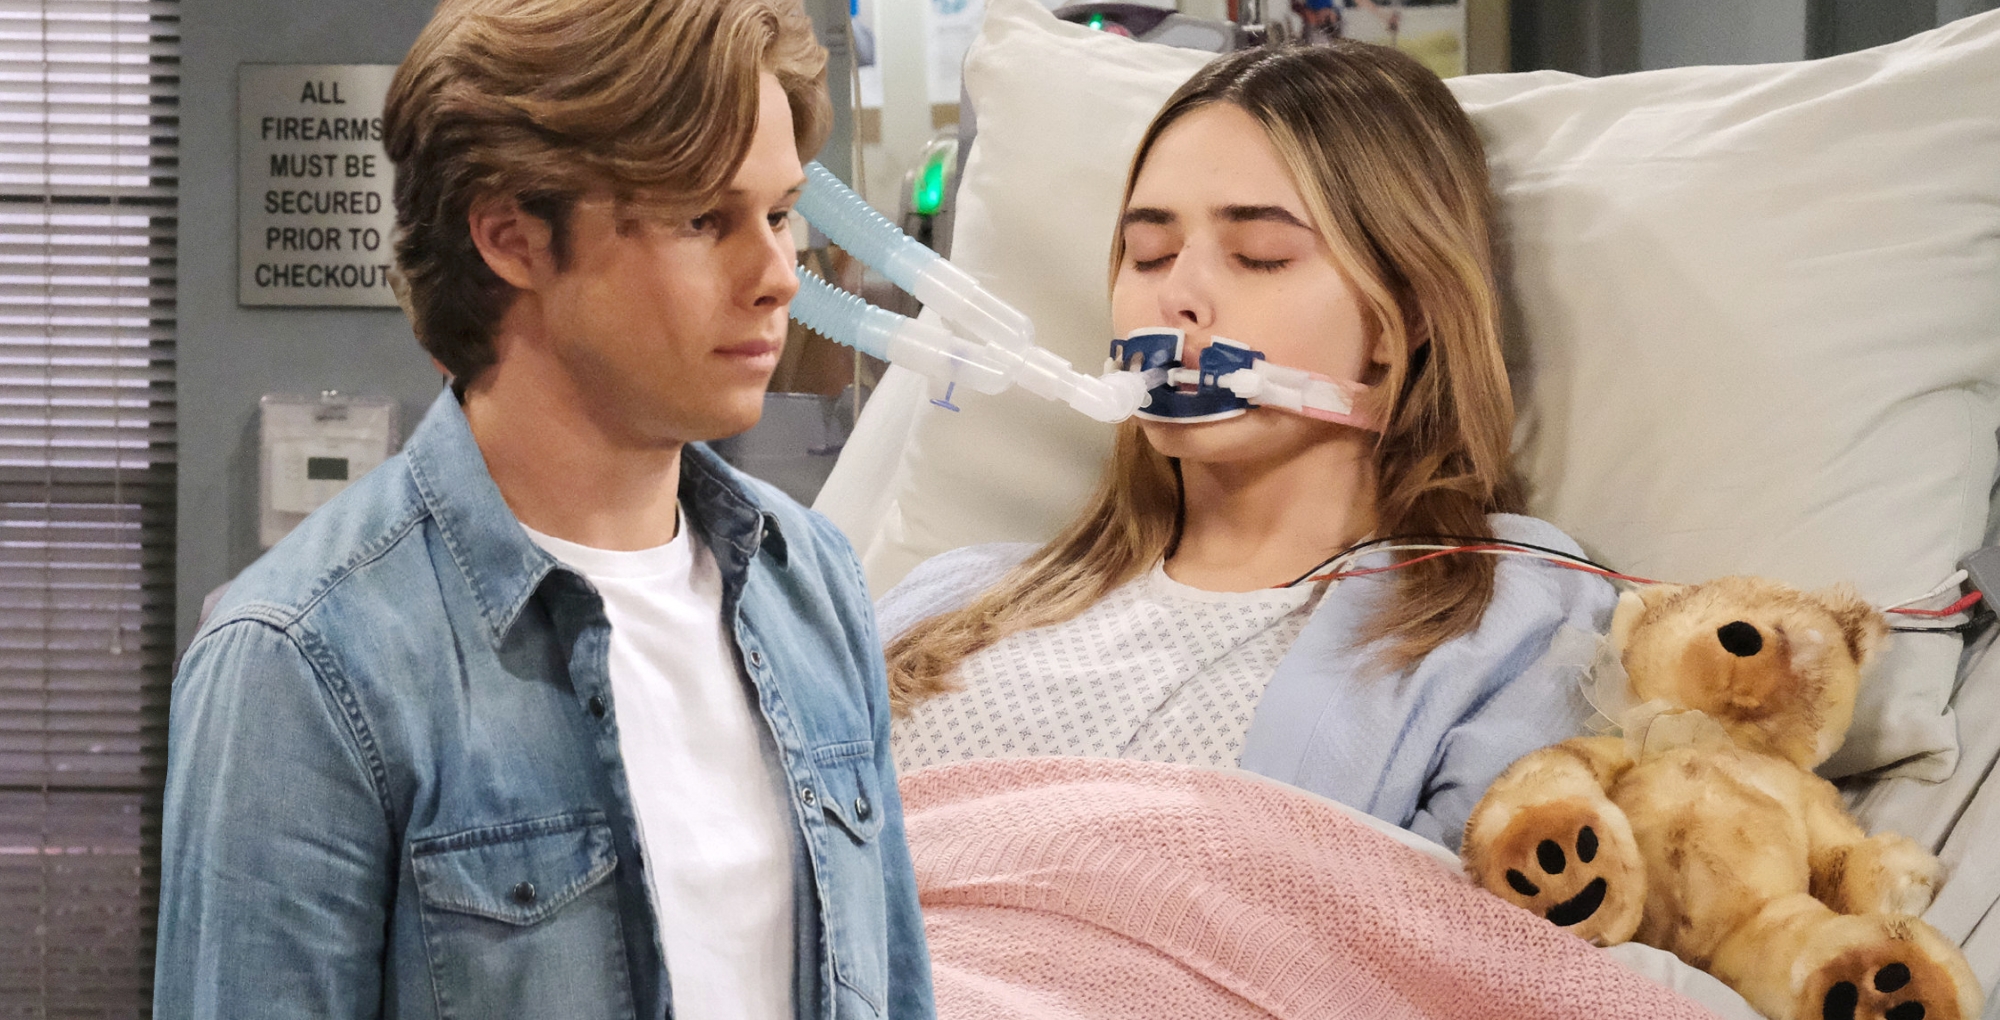 tate black headed to jail and holly jonas in a coma on days of our lives.